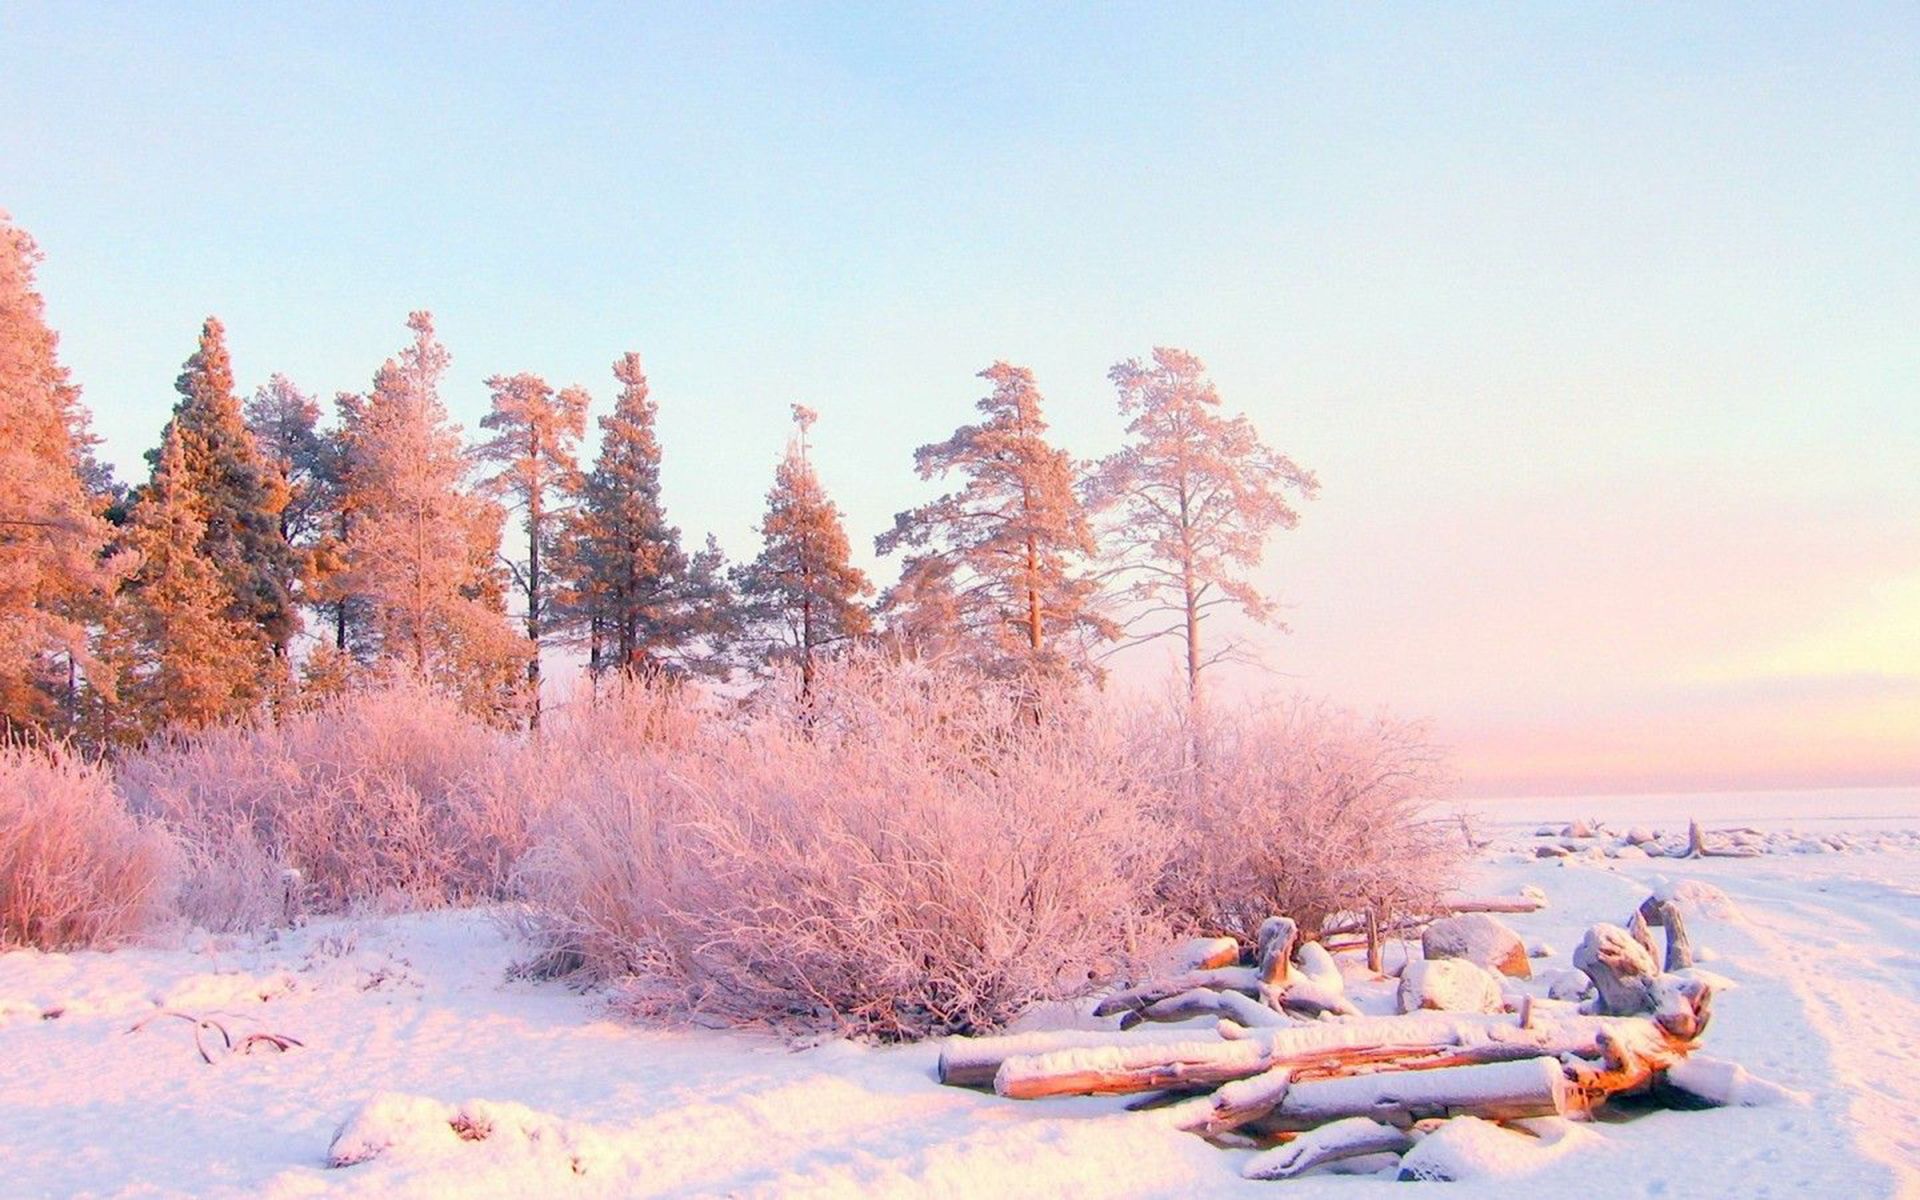 A snow covered beach with trees and rocks - Winter, nature, landscape, scenery, December, pastel pink, snow